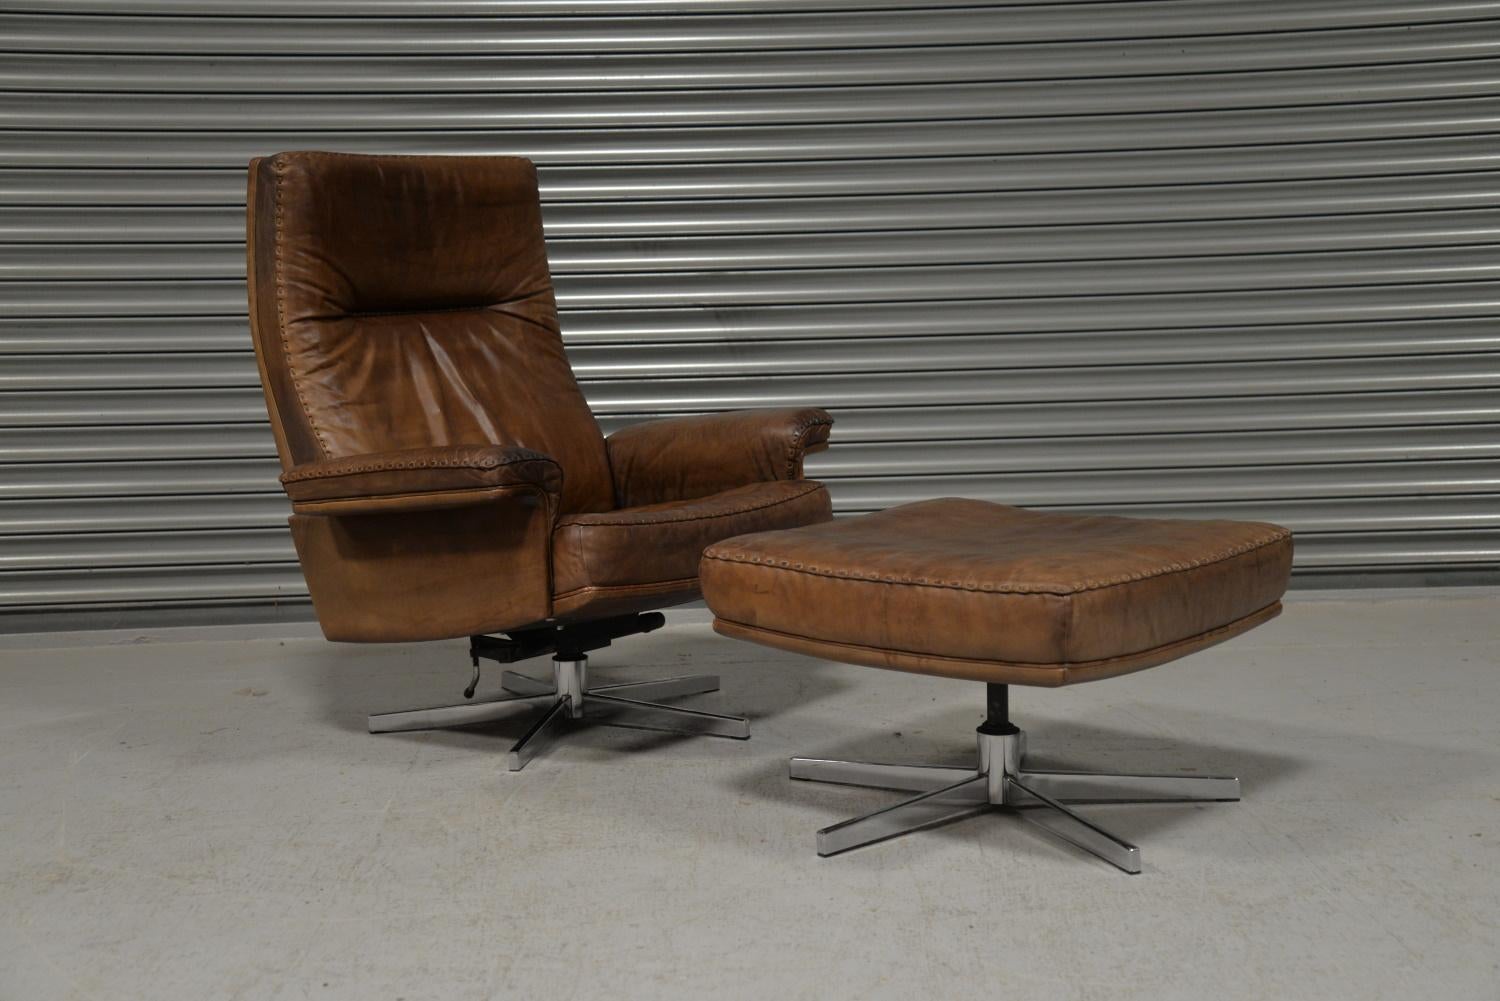 Swiss Vintage De Sede DS 35 Leather Swivel Armchair with Ottoman, Switzerland, 1970s For Sale